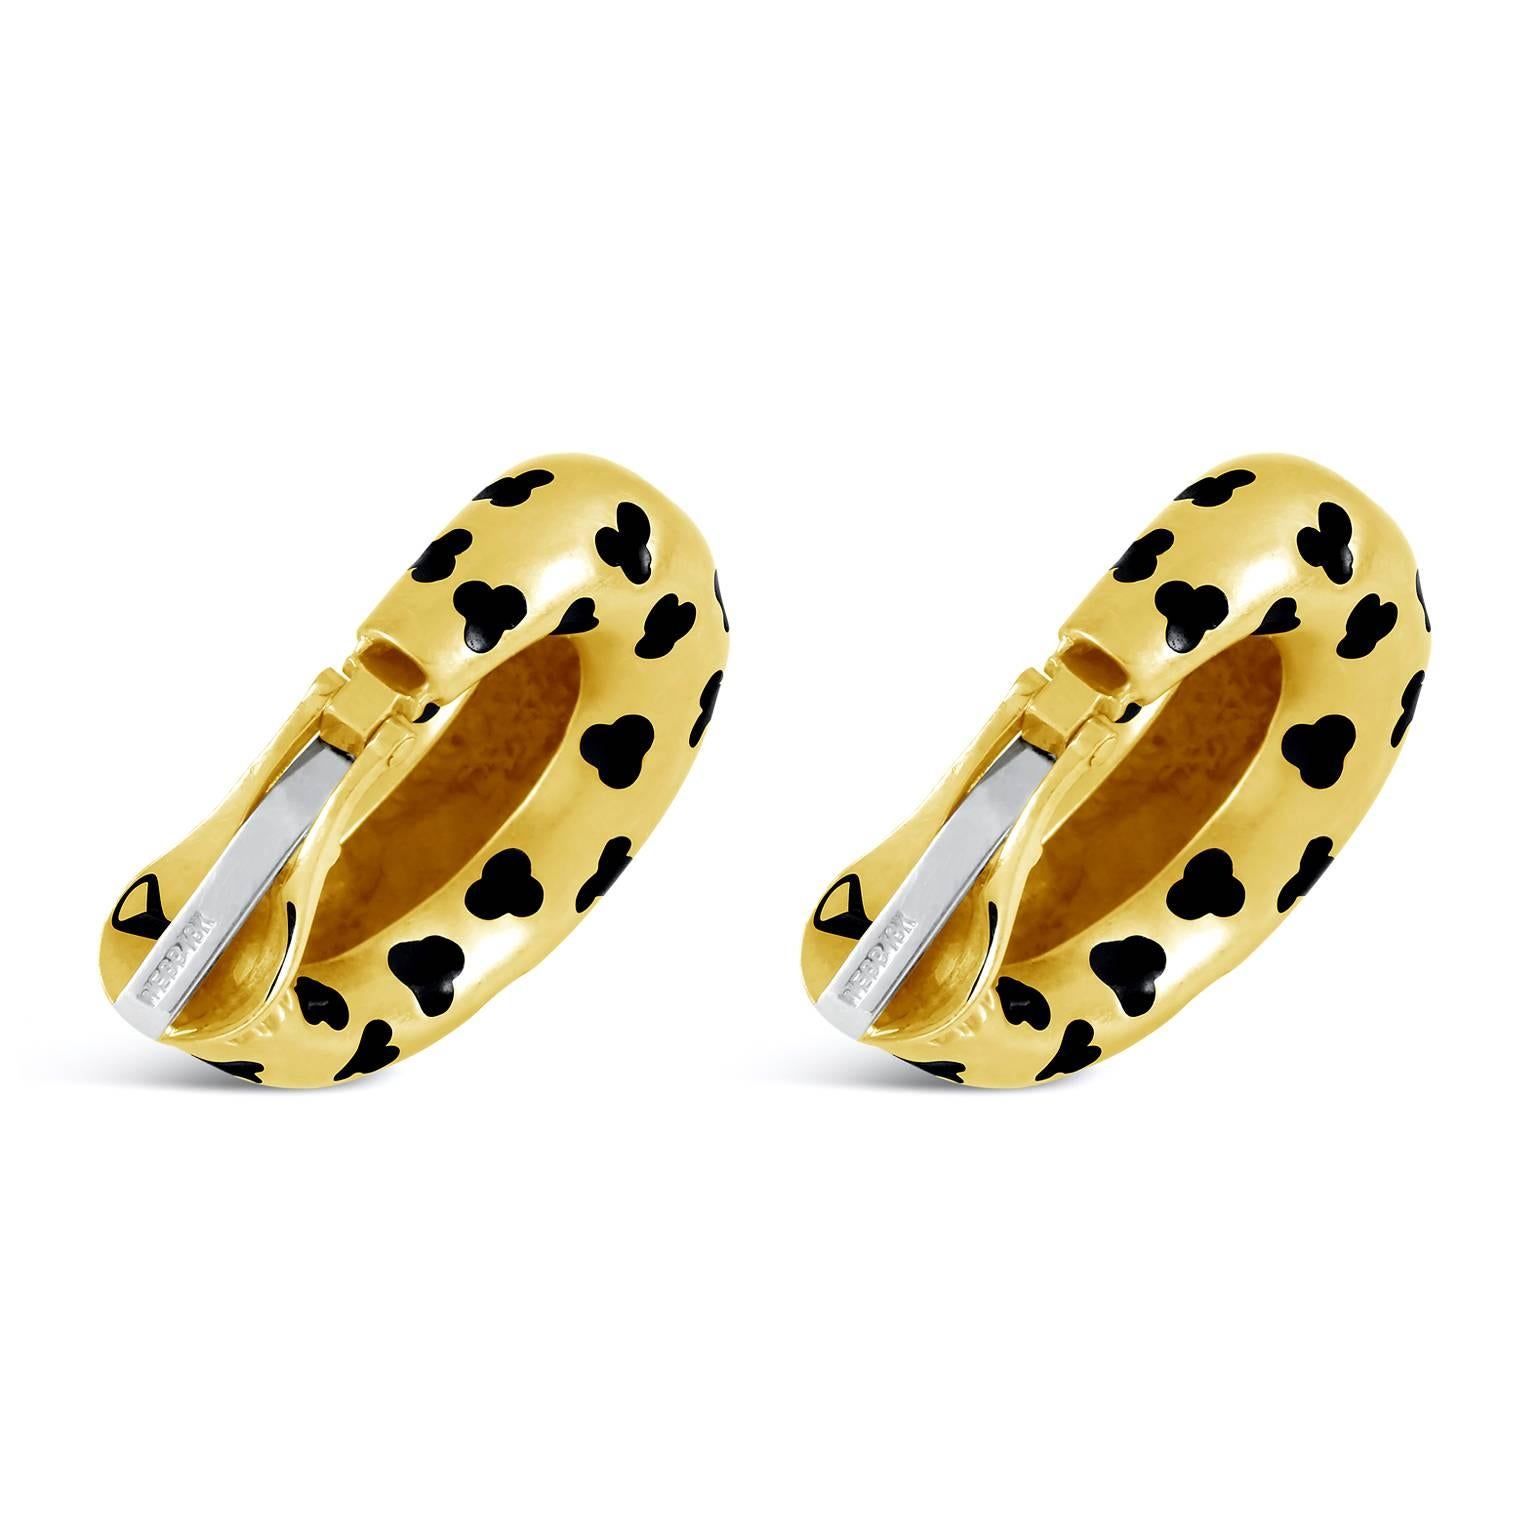 The classic teardrop gets a geometric bump with the graduated rippling effect of the leopard's spots.